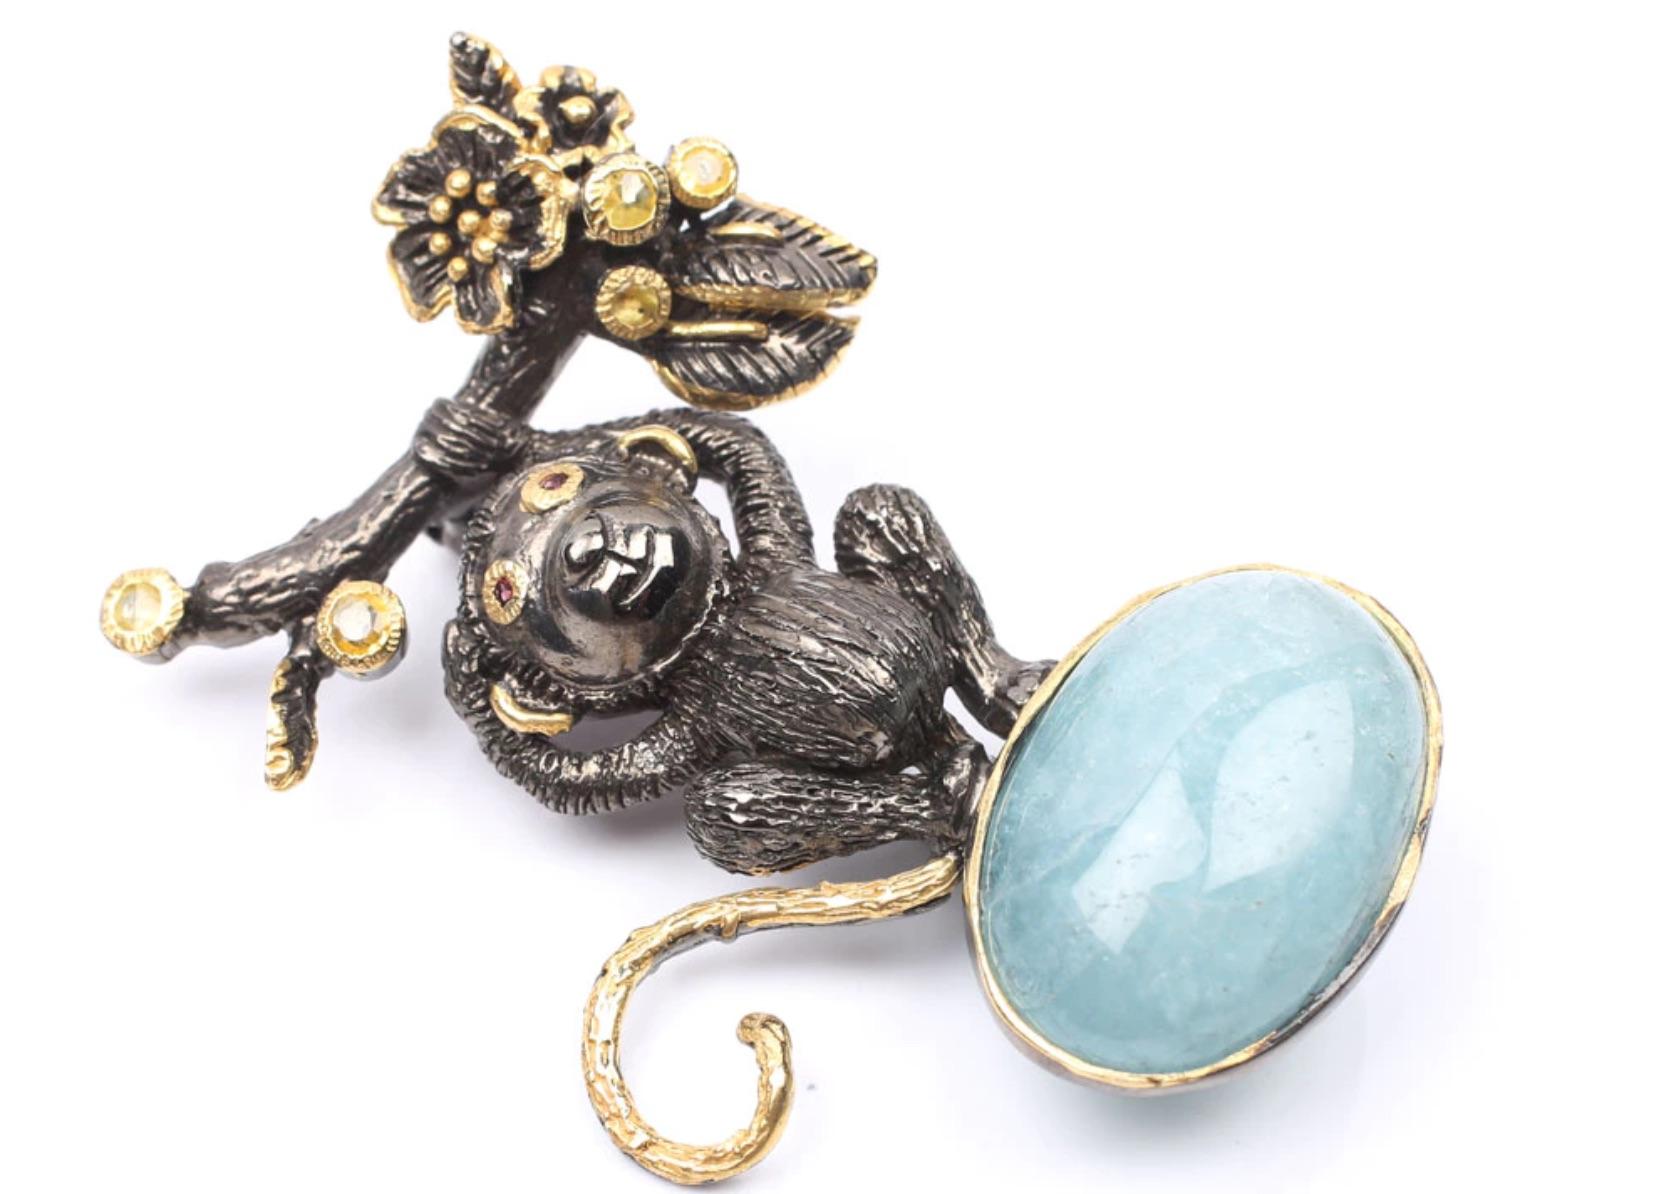 Most Adorable Sterling Silver Oxidized and Polished with Vermeil touches
Monkey Brooch featuring 22.82 ct. Aquamarine Cabochon Gemstone and other Gemstones- Sapphires in round vermeil setting, and garnet eyes. Monkey is Hanging from a Flowery Tree